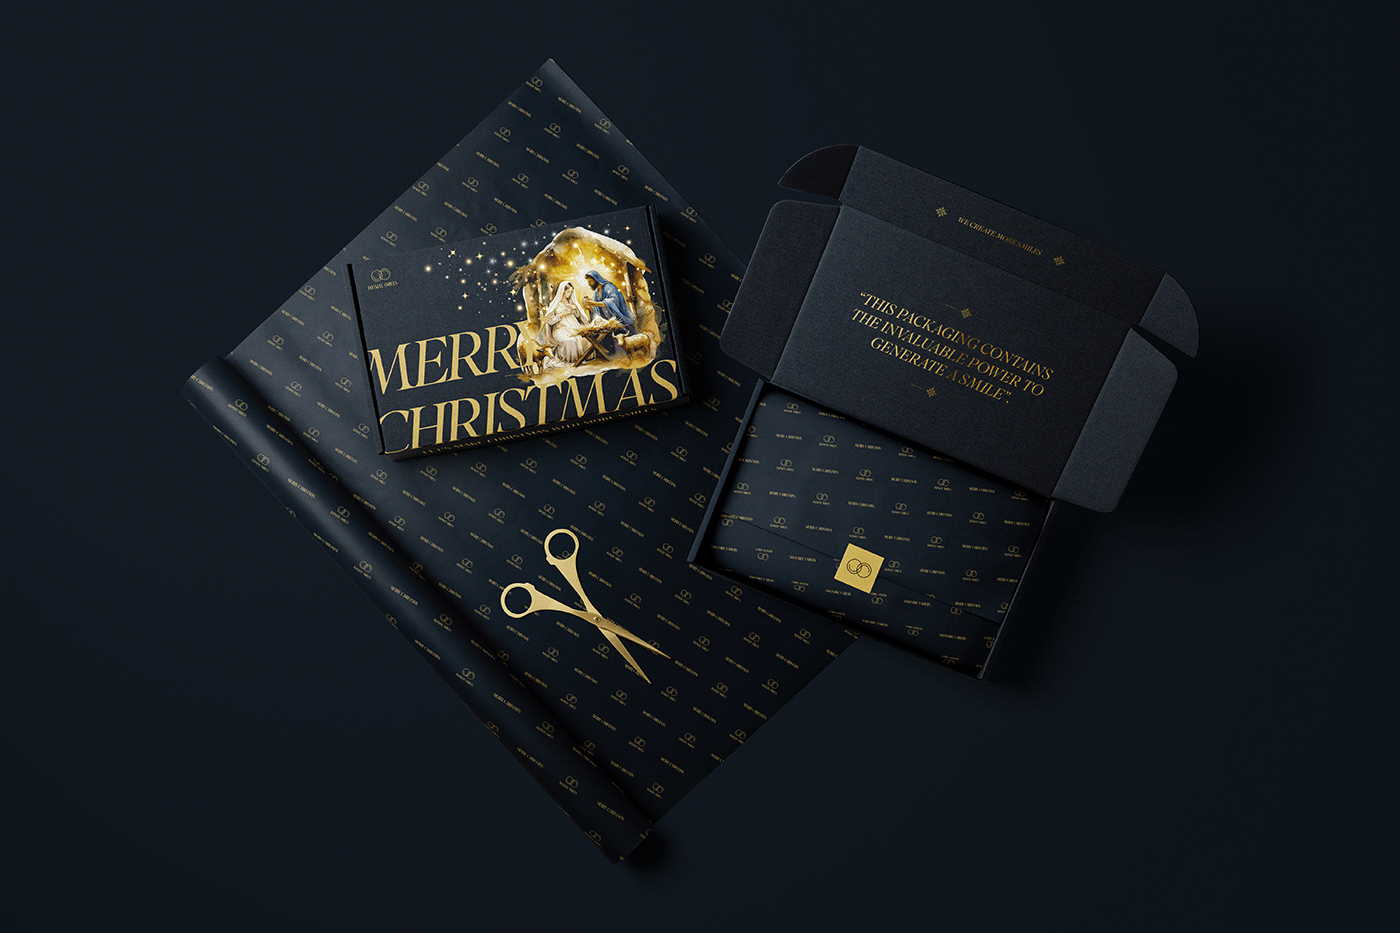 Christmas-themed packaging and bag design and paper wrapping